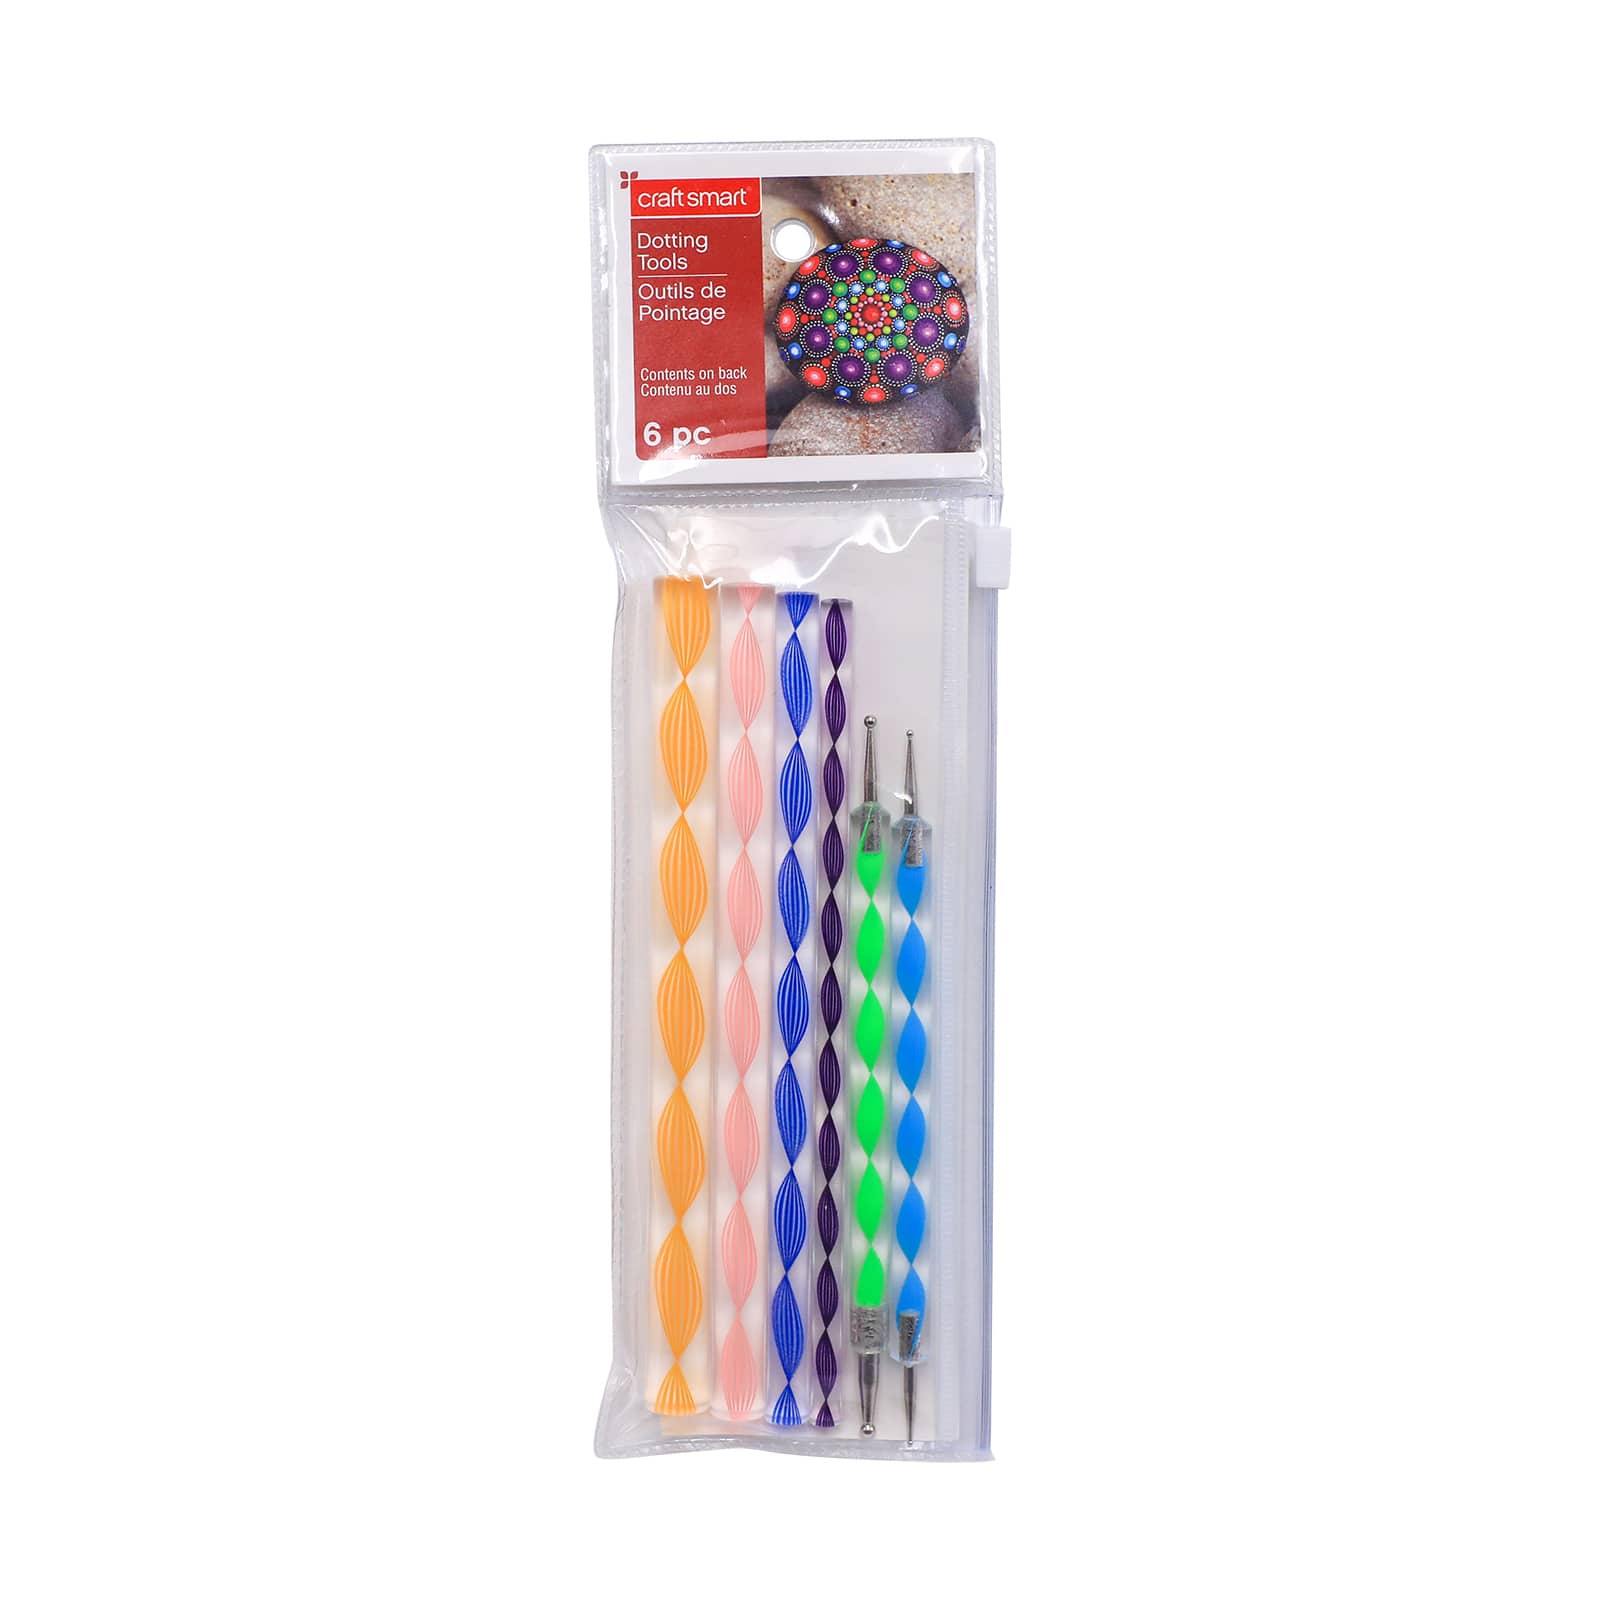 Mandala Dotting Tools With Colorful Handles Paint By Craft Smart�, 6Ct. | Michaels�